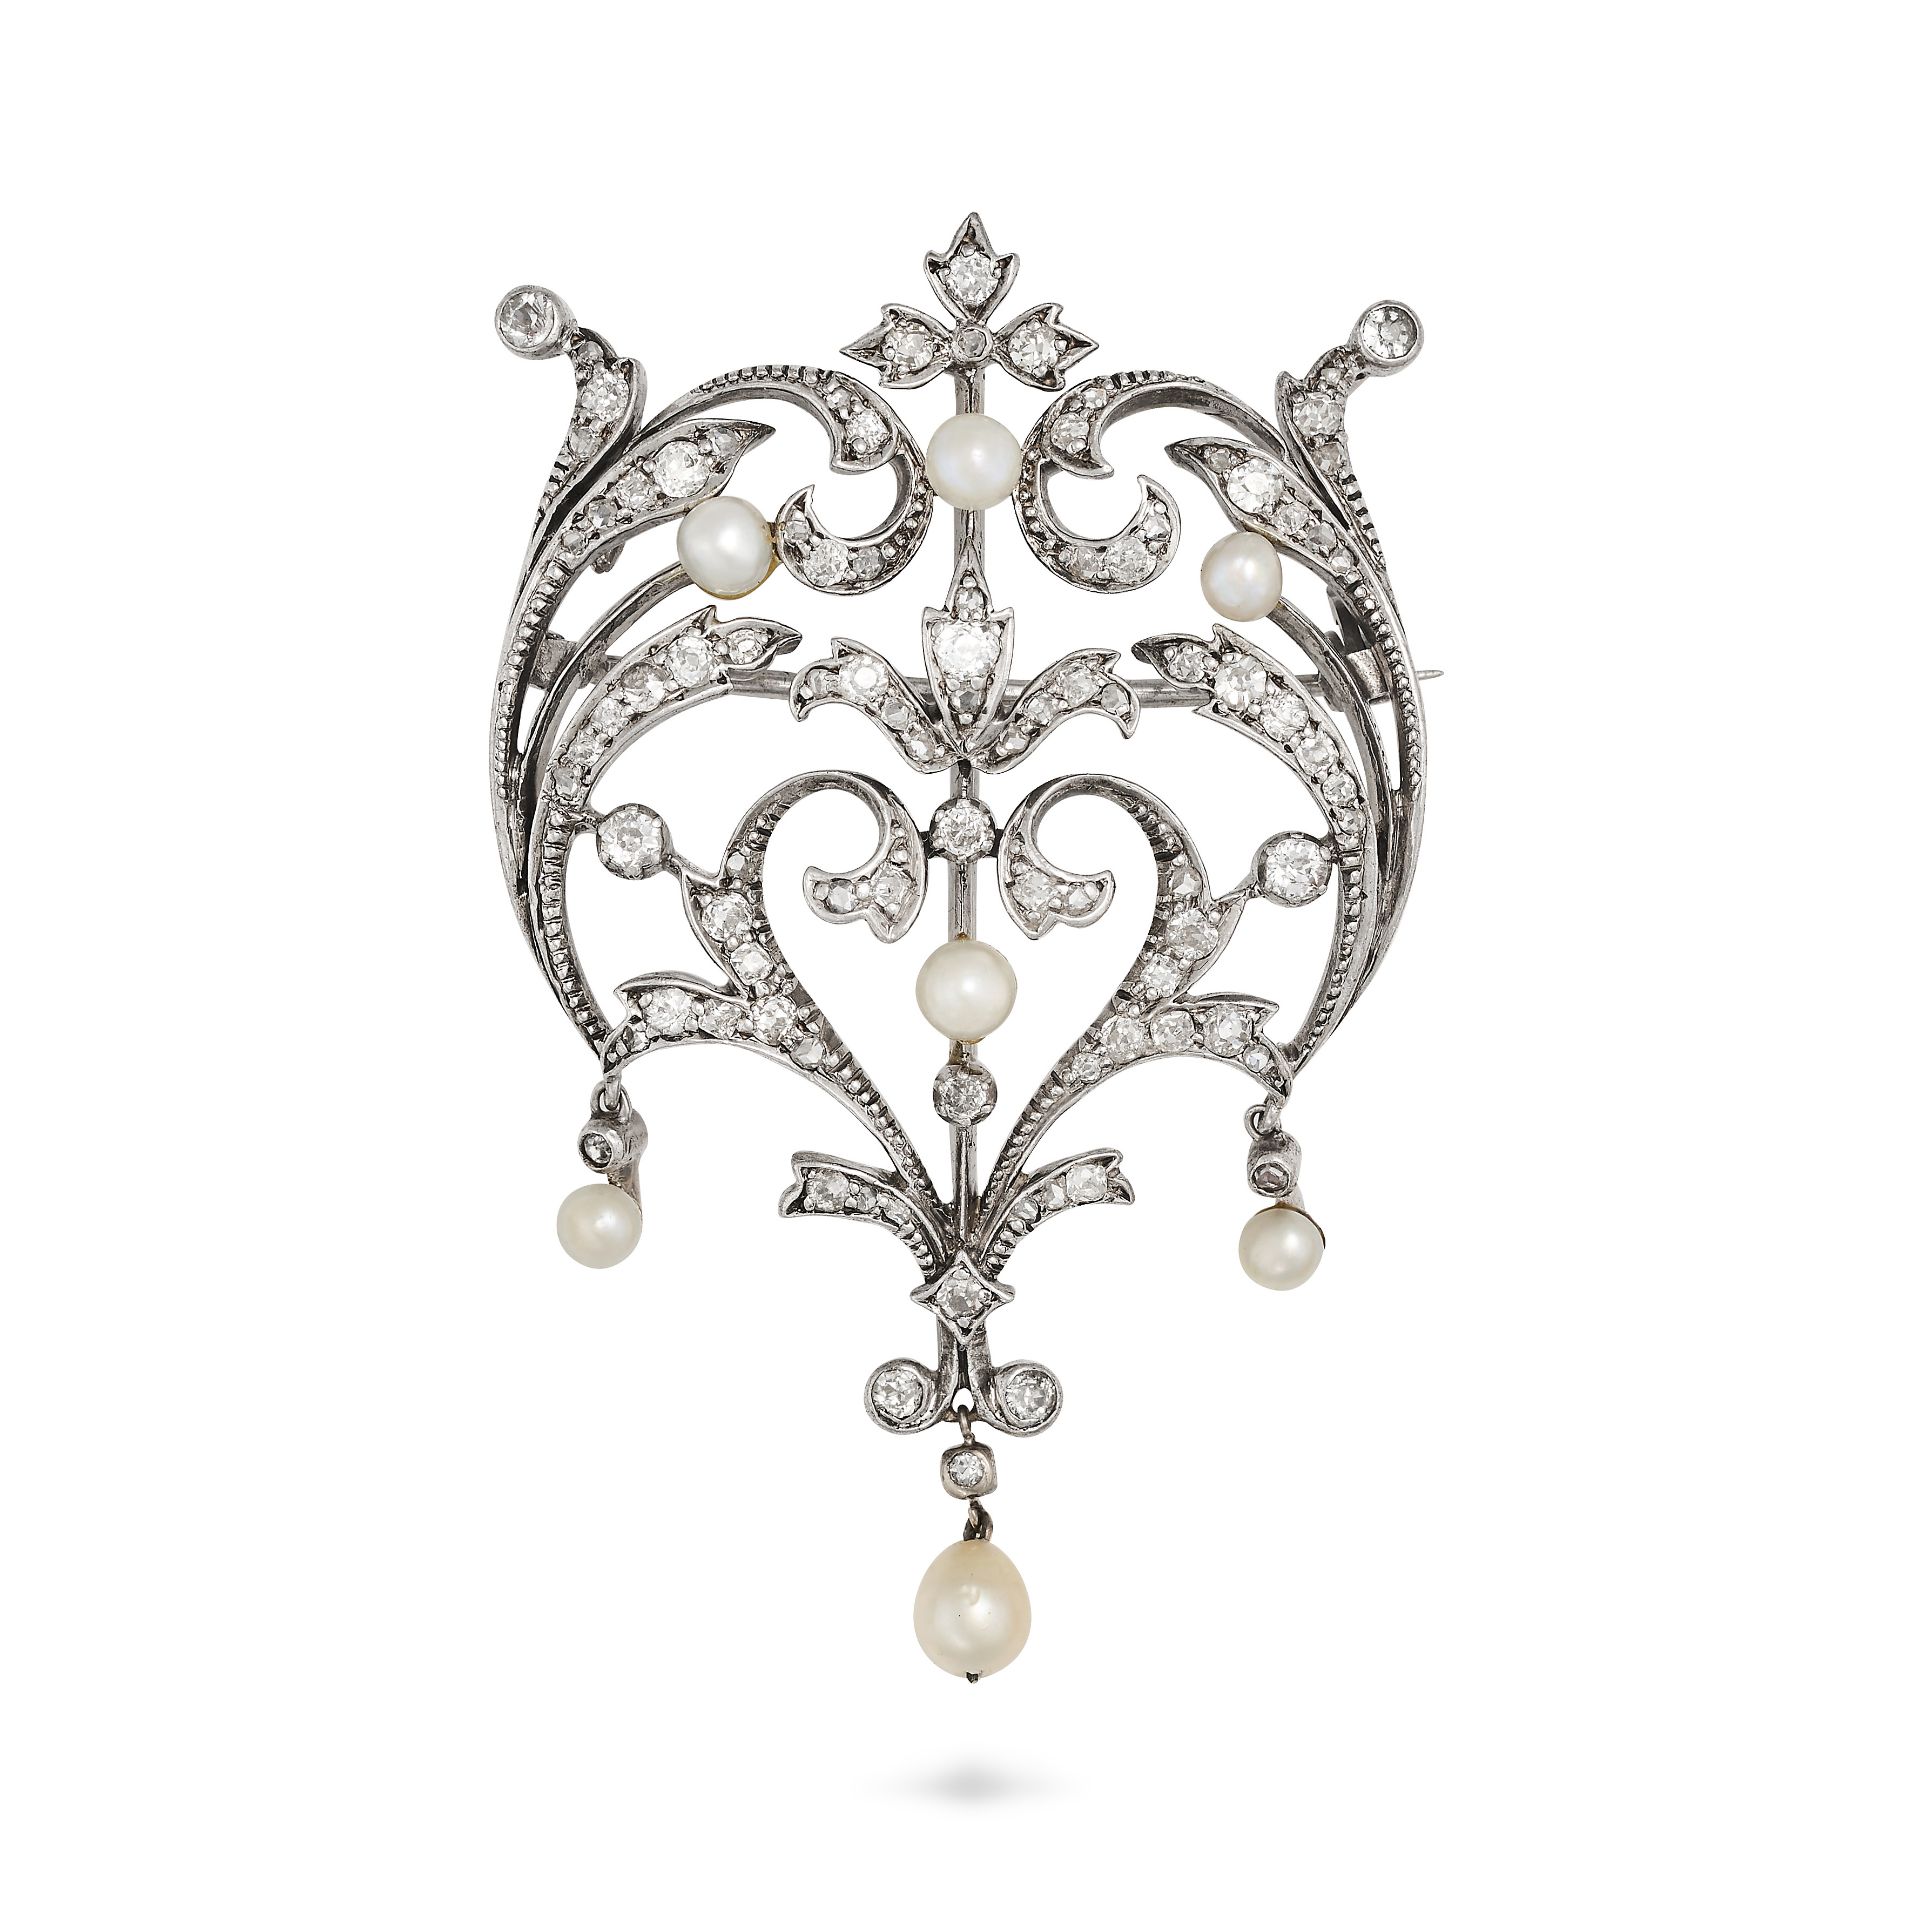 AN ANTIQUE EDWARDIAN DIAMOND AND PEARL BROOCH / PENDANT rhodium plated, in openwork scrolling des...